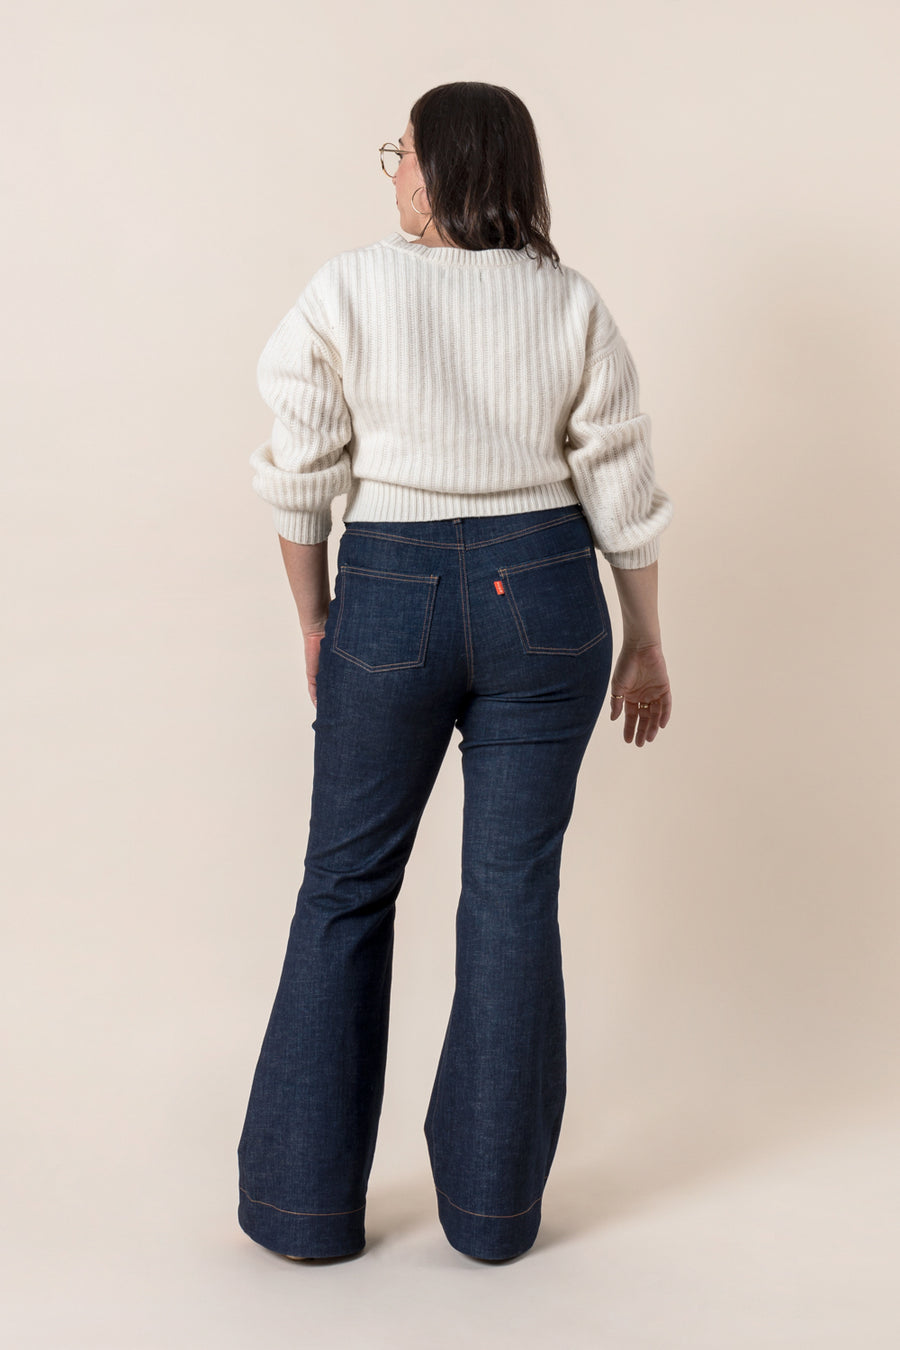 Jude Jeans | Flare Jeans Pattern | Closet Core Patterns